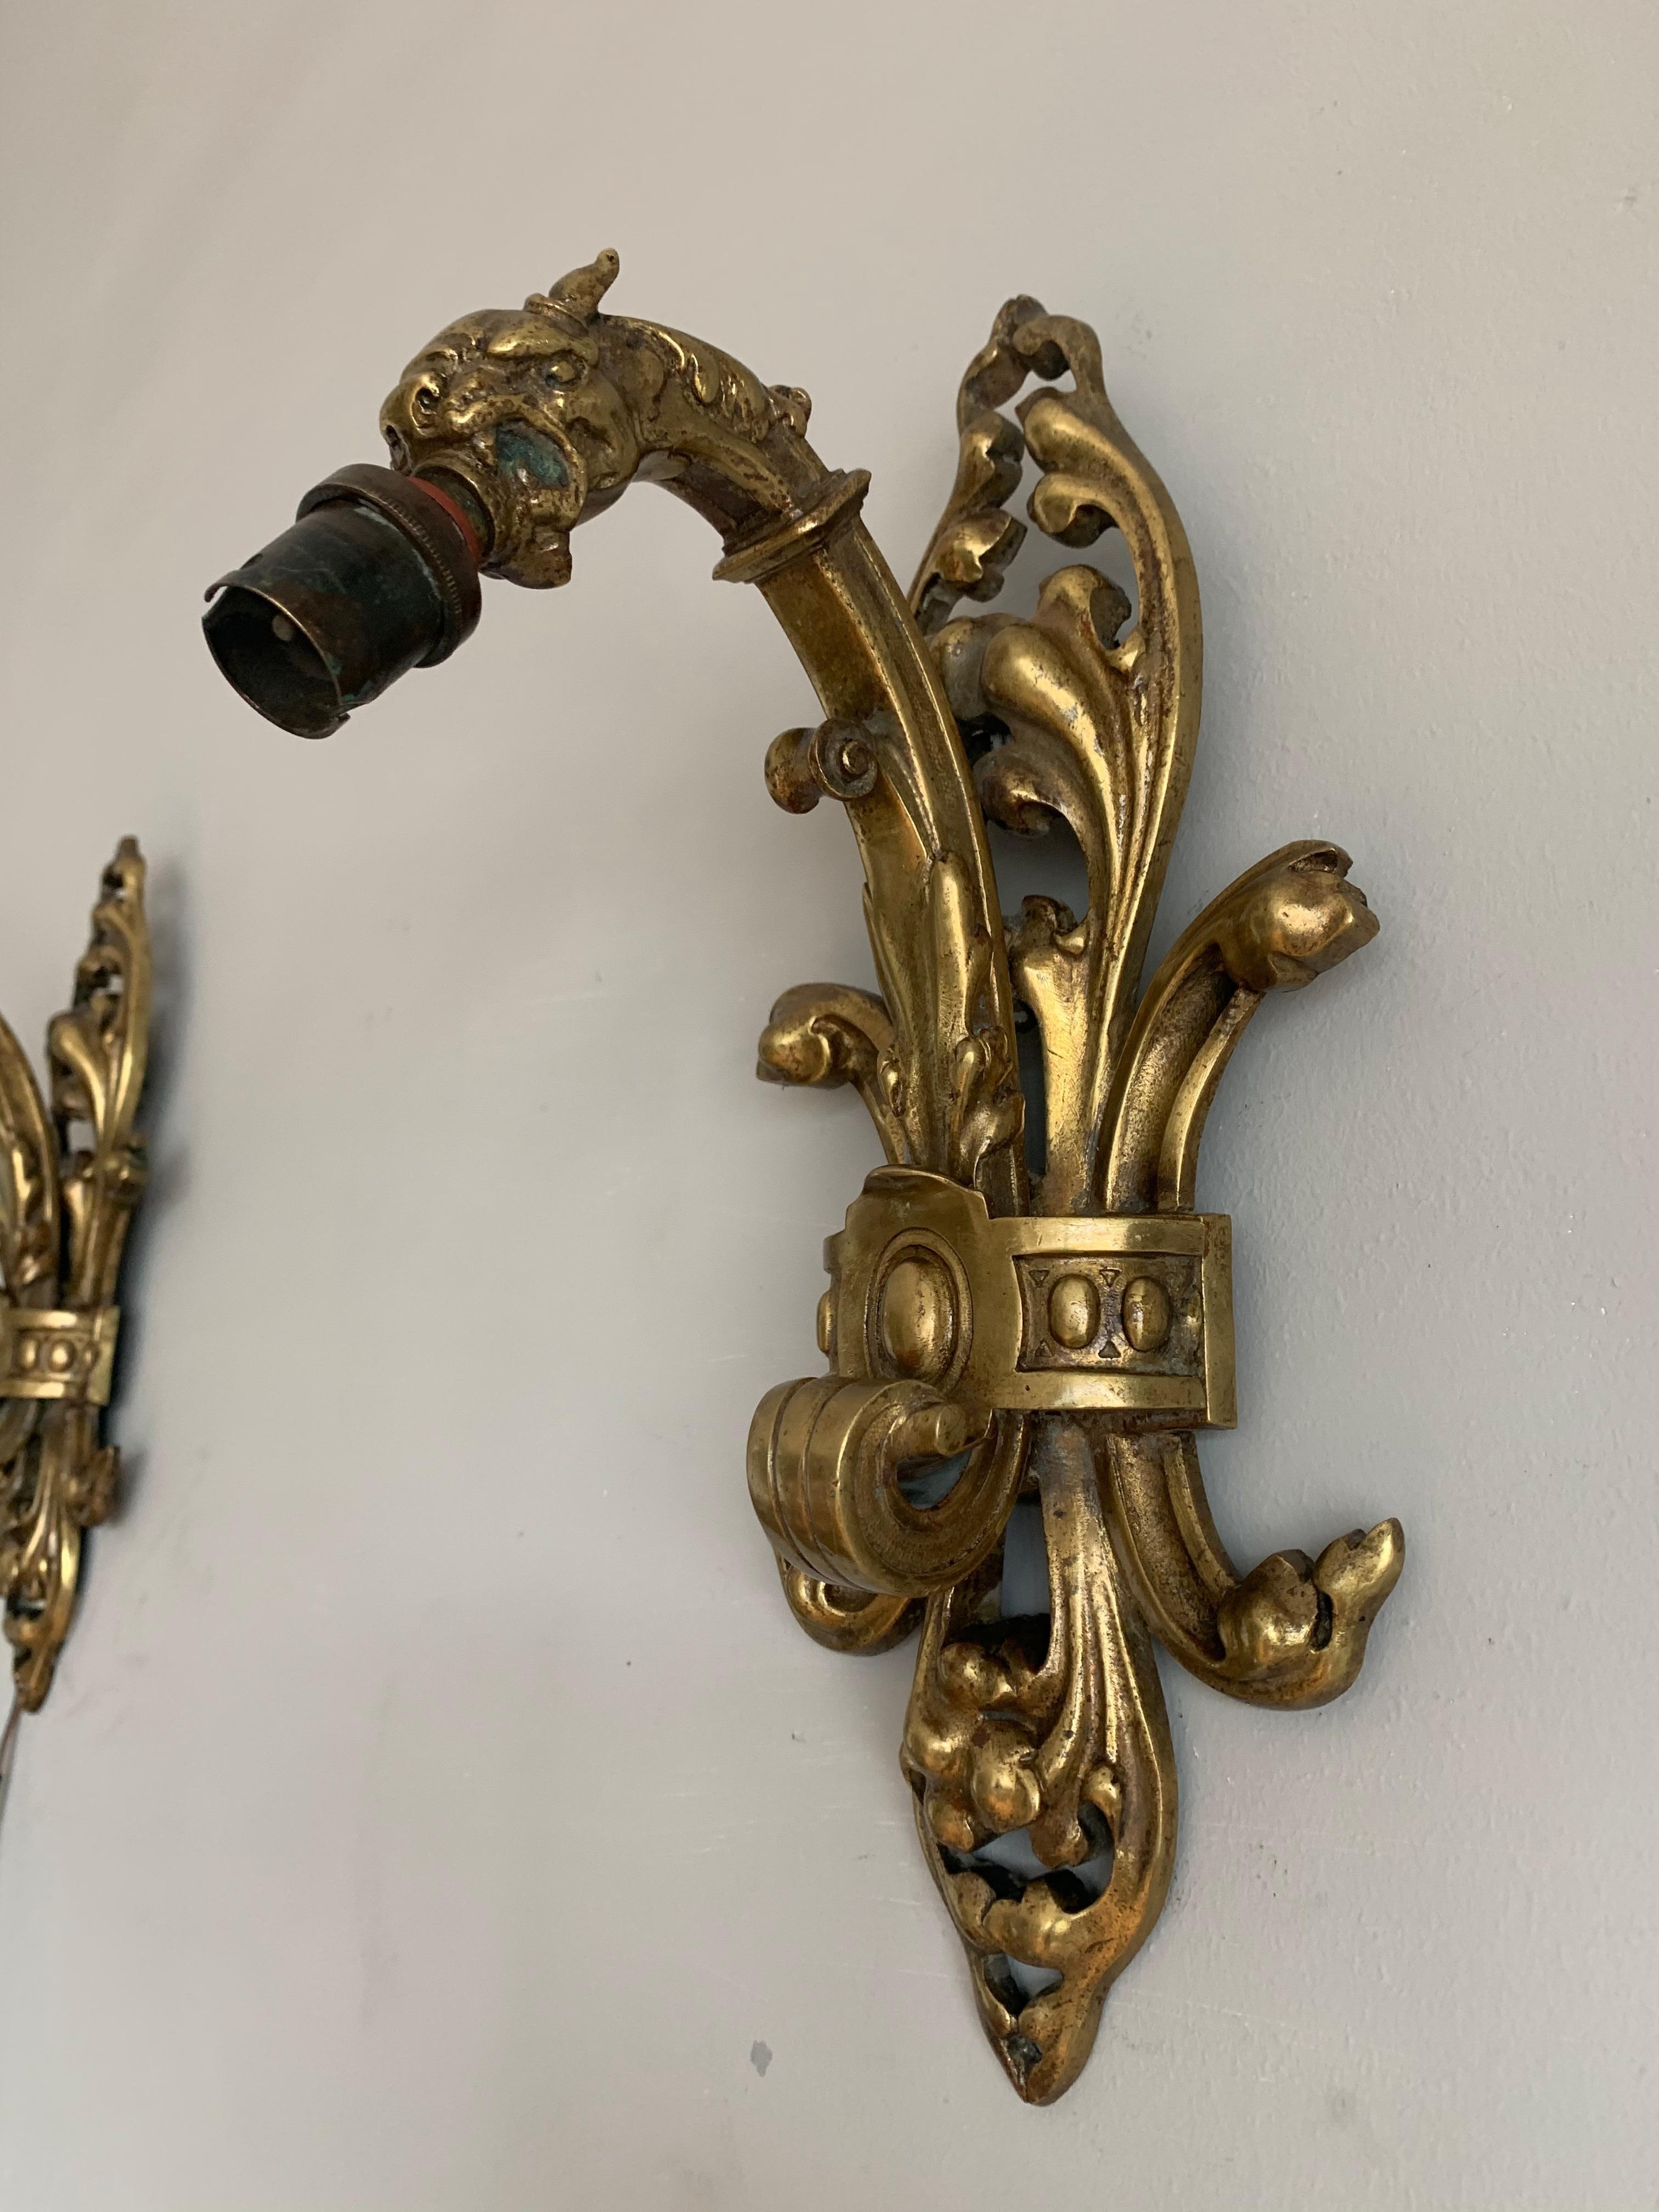 Pair of gilt bronze, Gothic Revival sconces with fierce dragon heads.

If you are a collector of Gothic antiques then this rare and top quality made pair of dragon sconces could be yours to own and enjoy. Handcrafted circa 1900-1910 these detailed